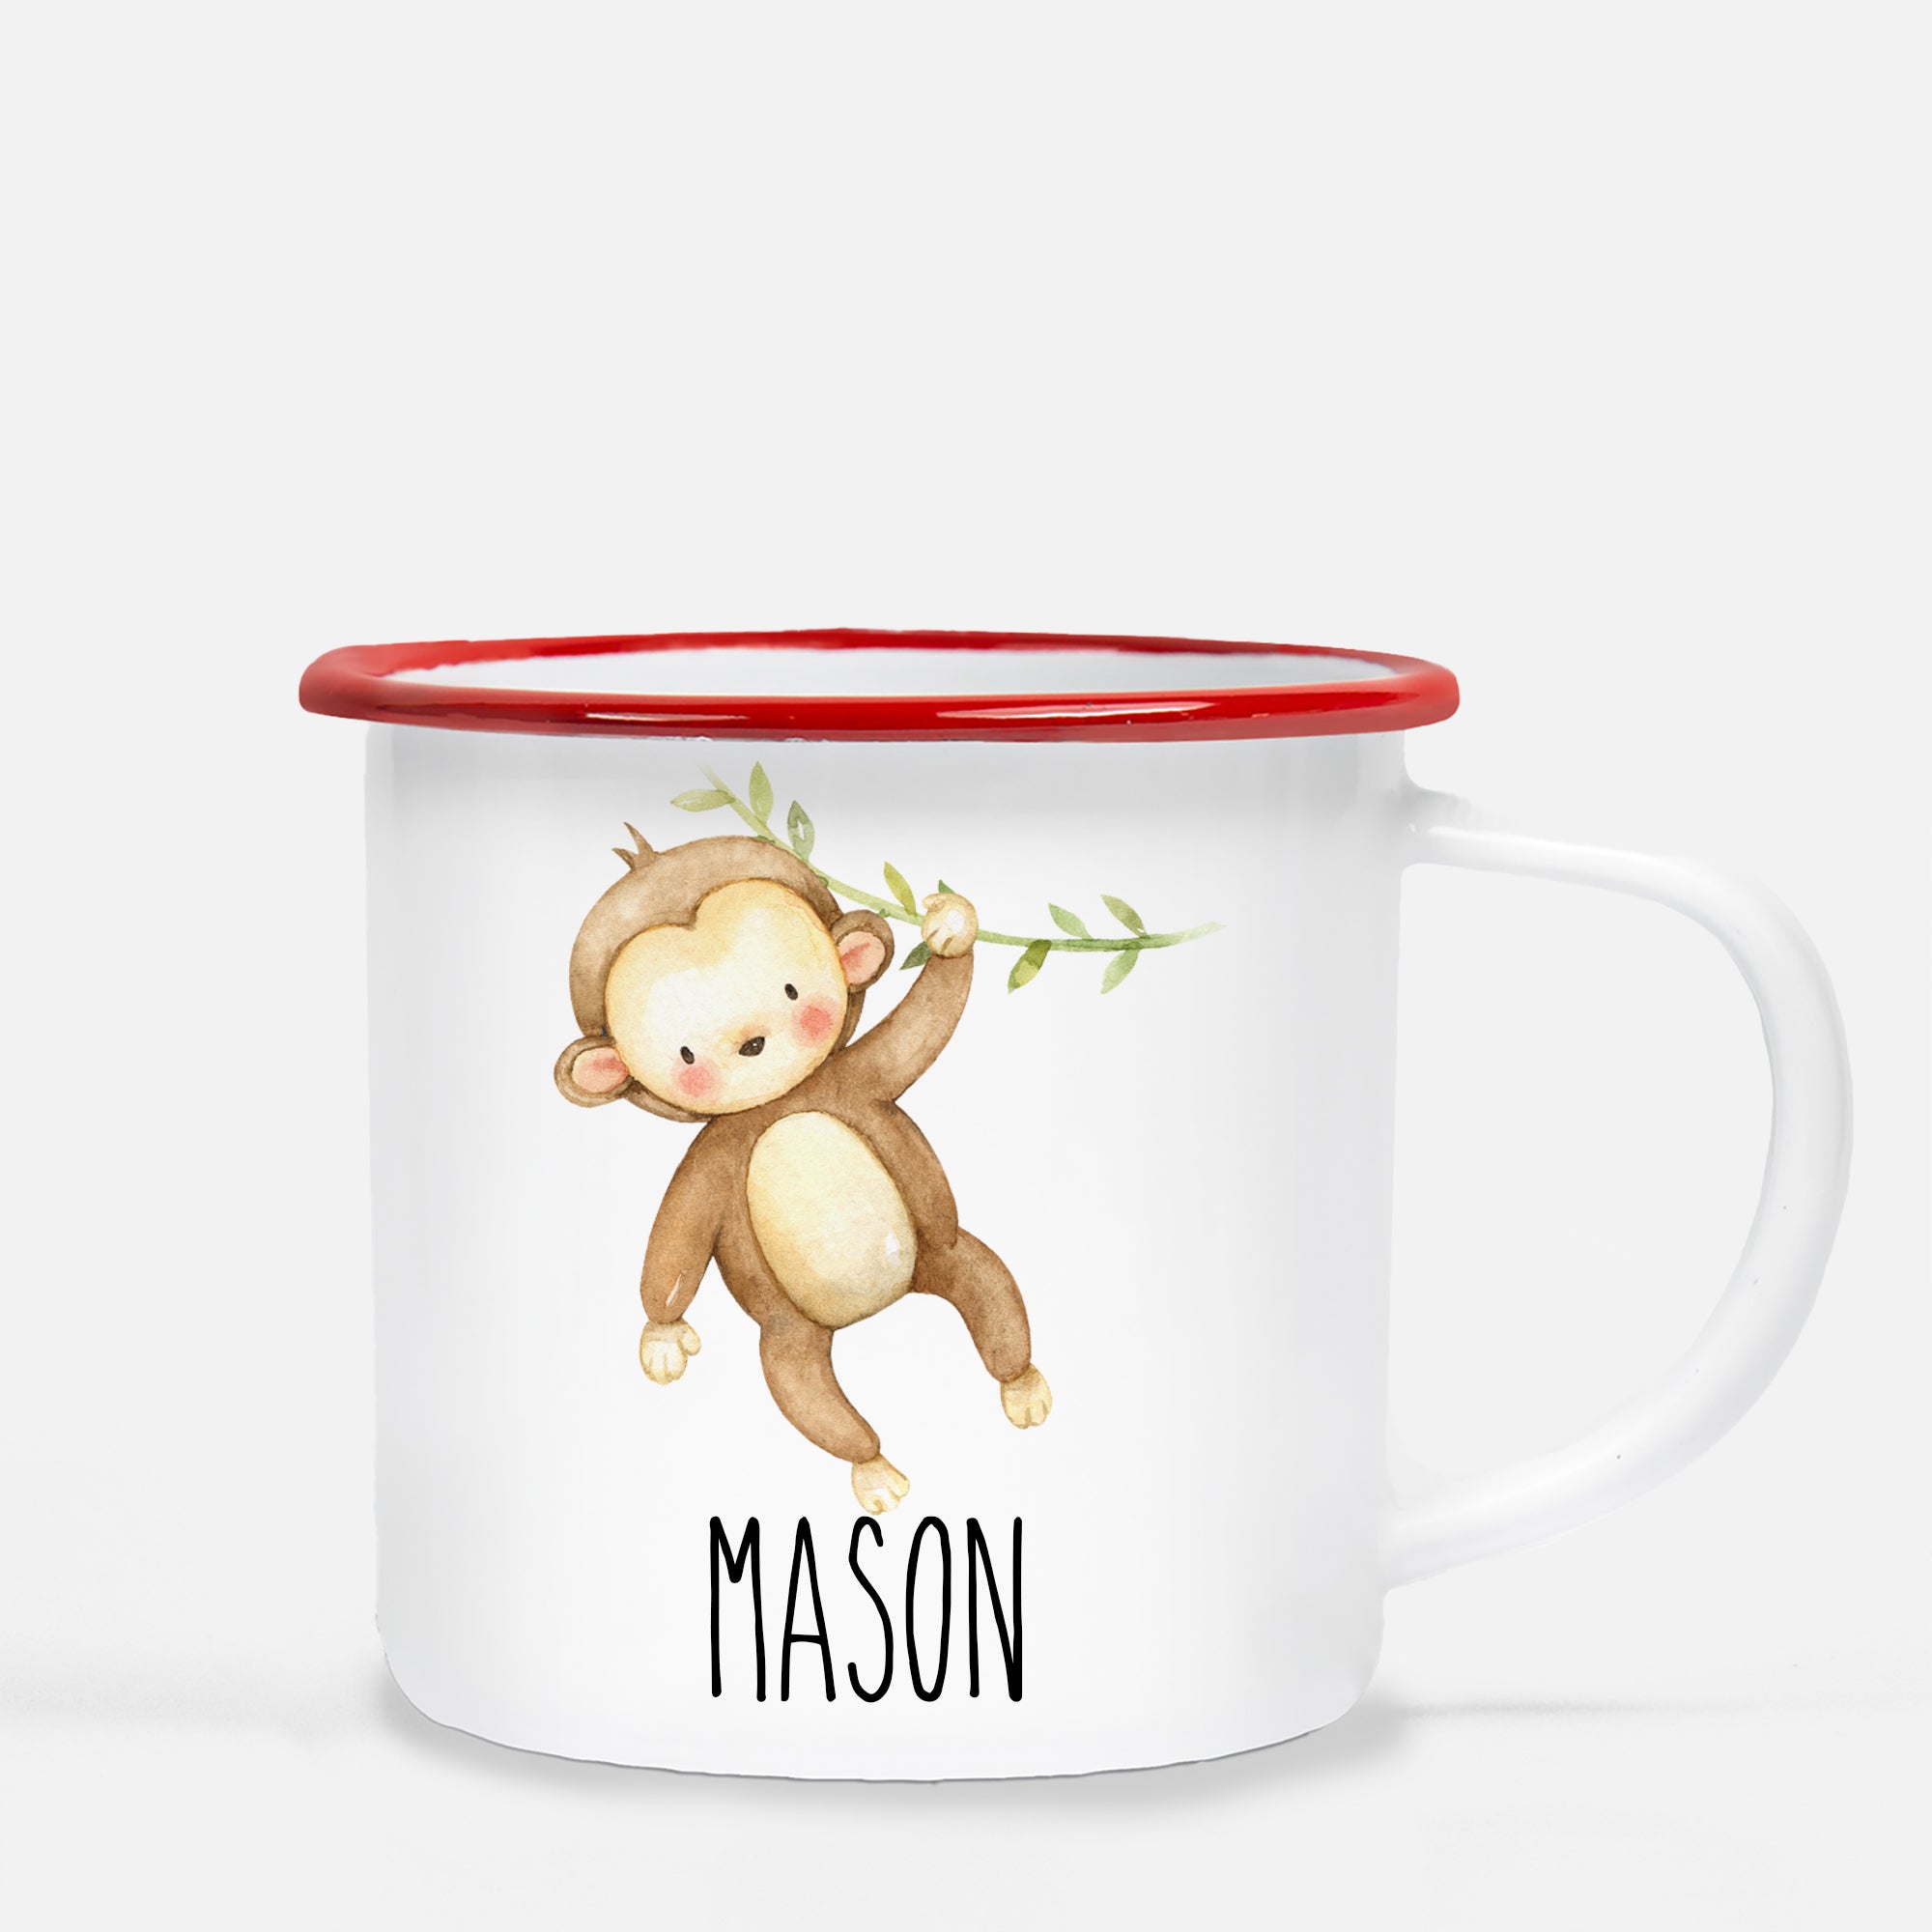 monkey camp mug, personalized with child's name, Pipsy.com, red lip